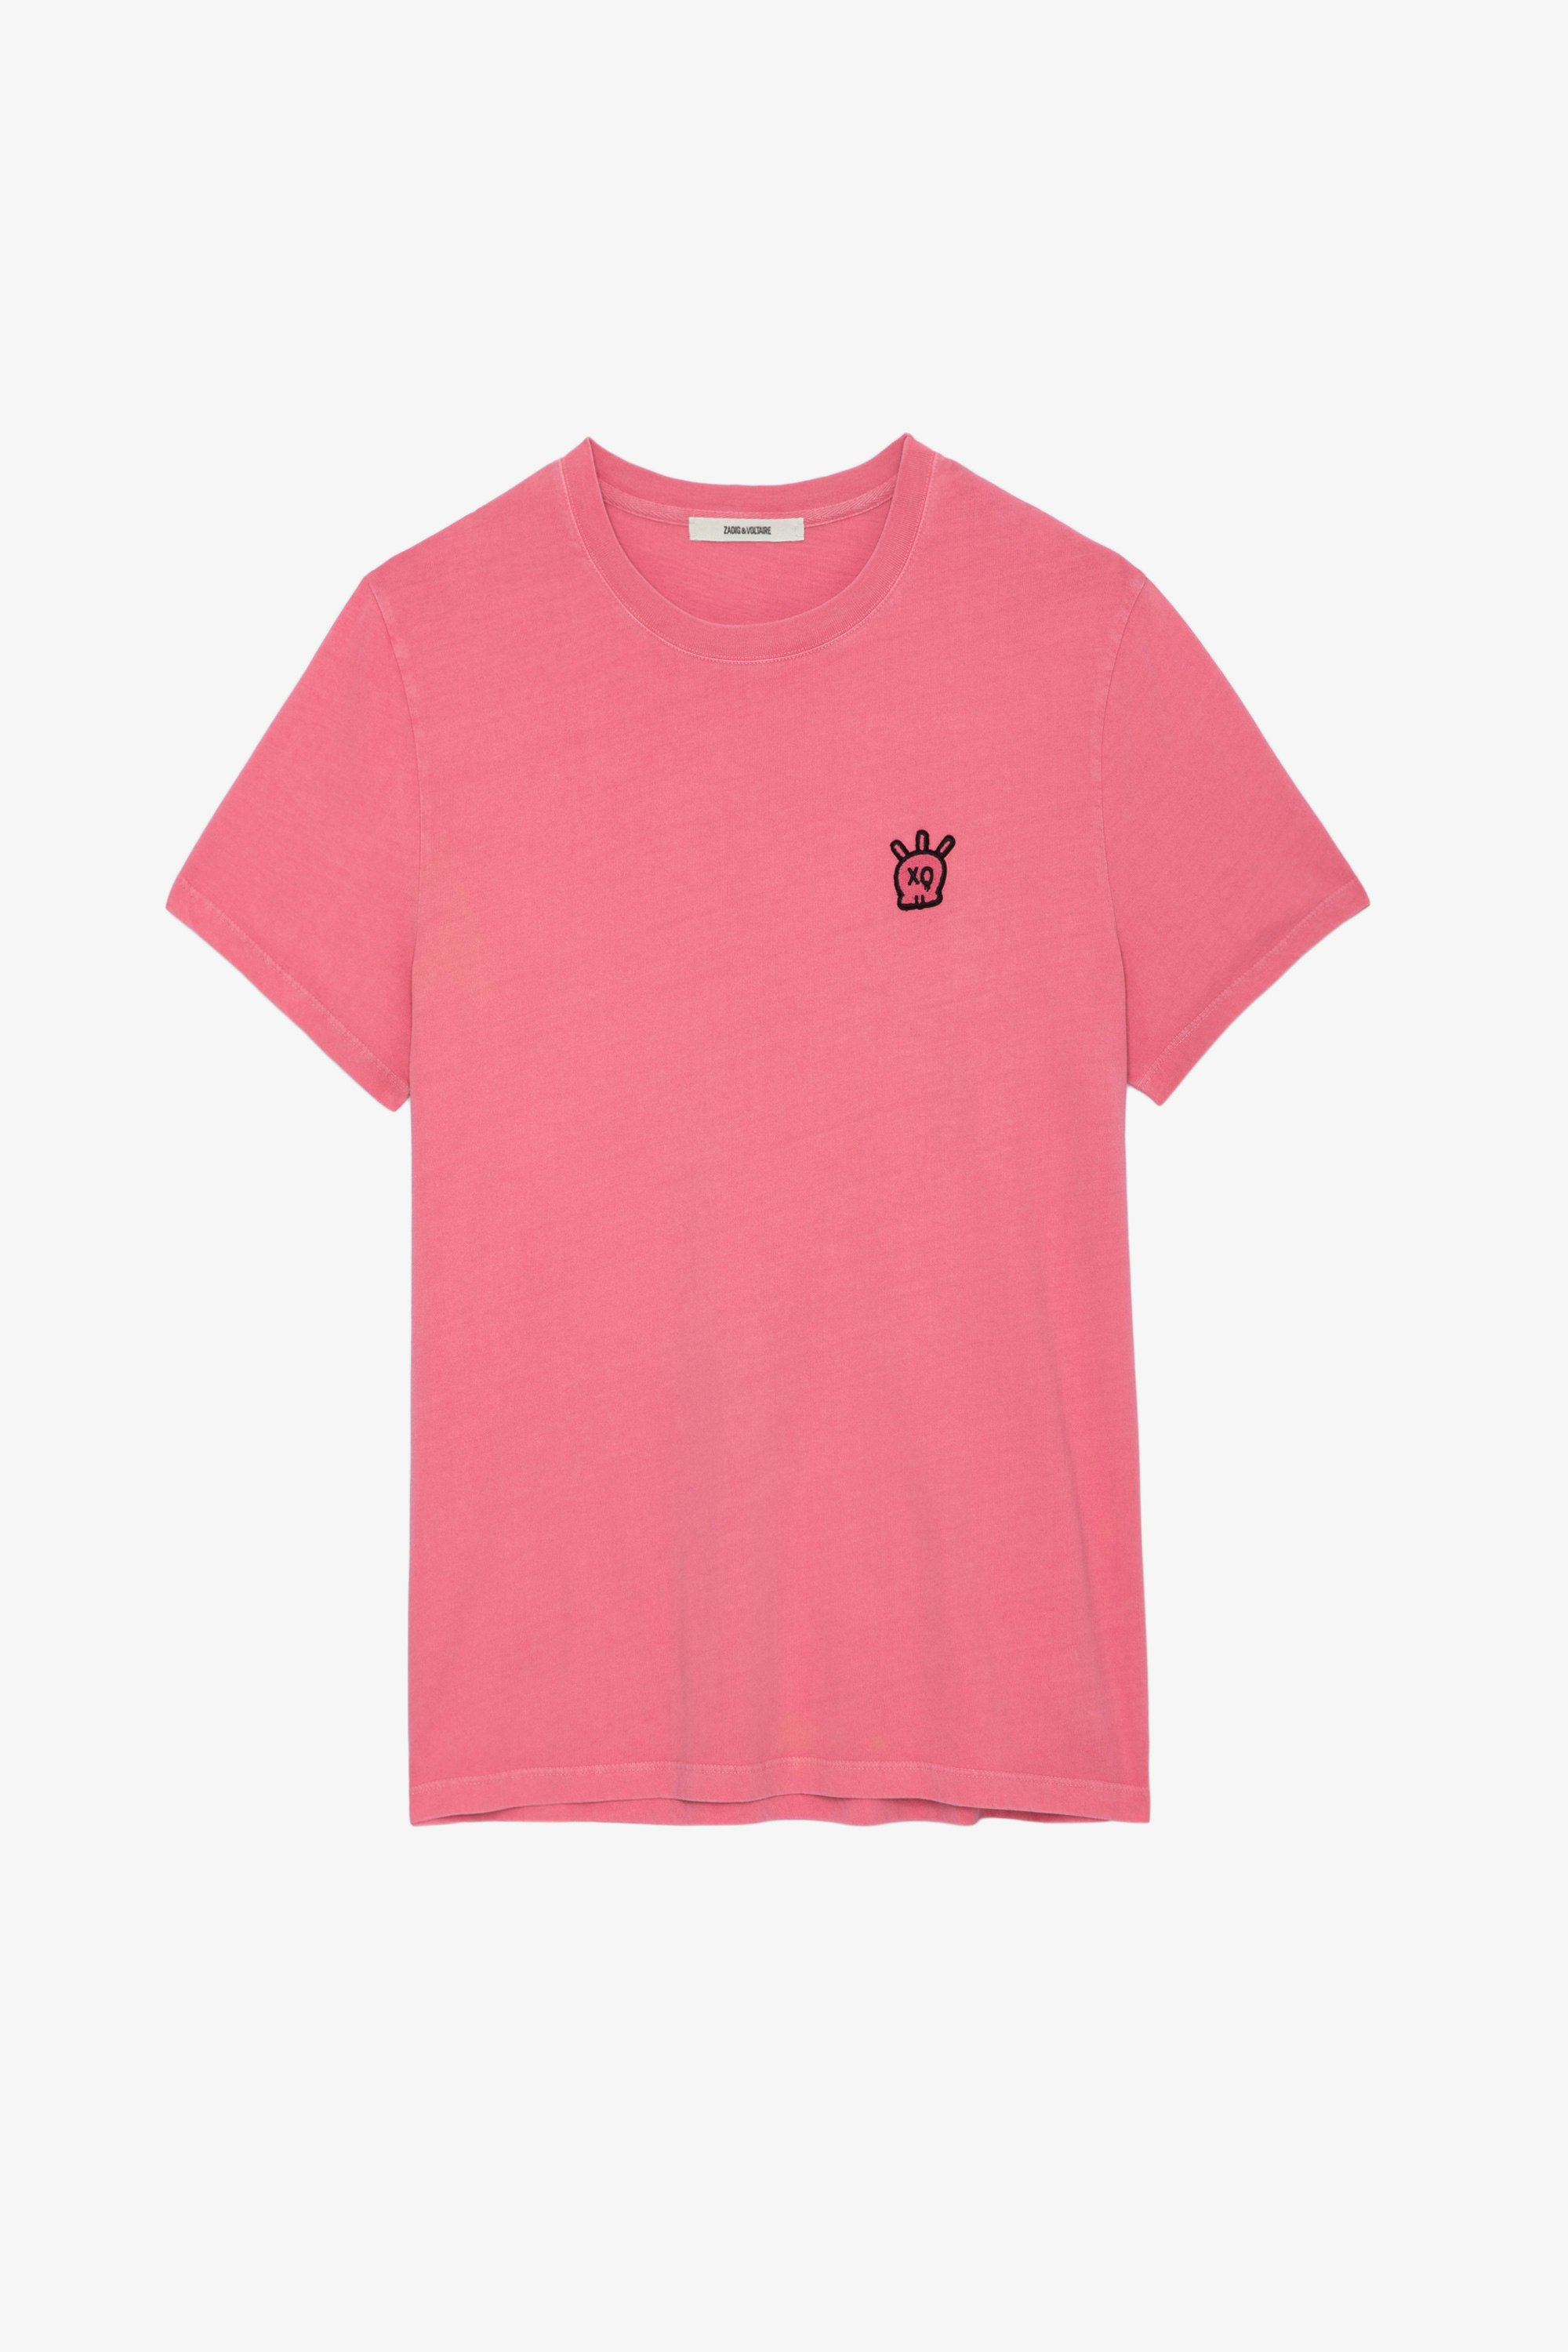 Tommy Skull XO T-shirt - Pink cotton round-neck T-shirt with short sleeves and Skull XO patch.